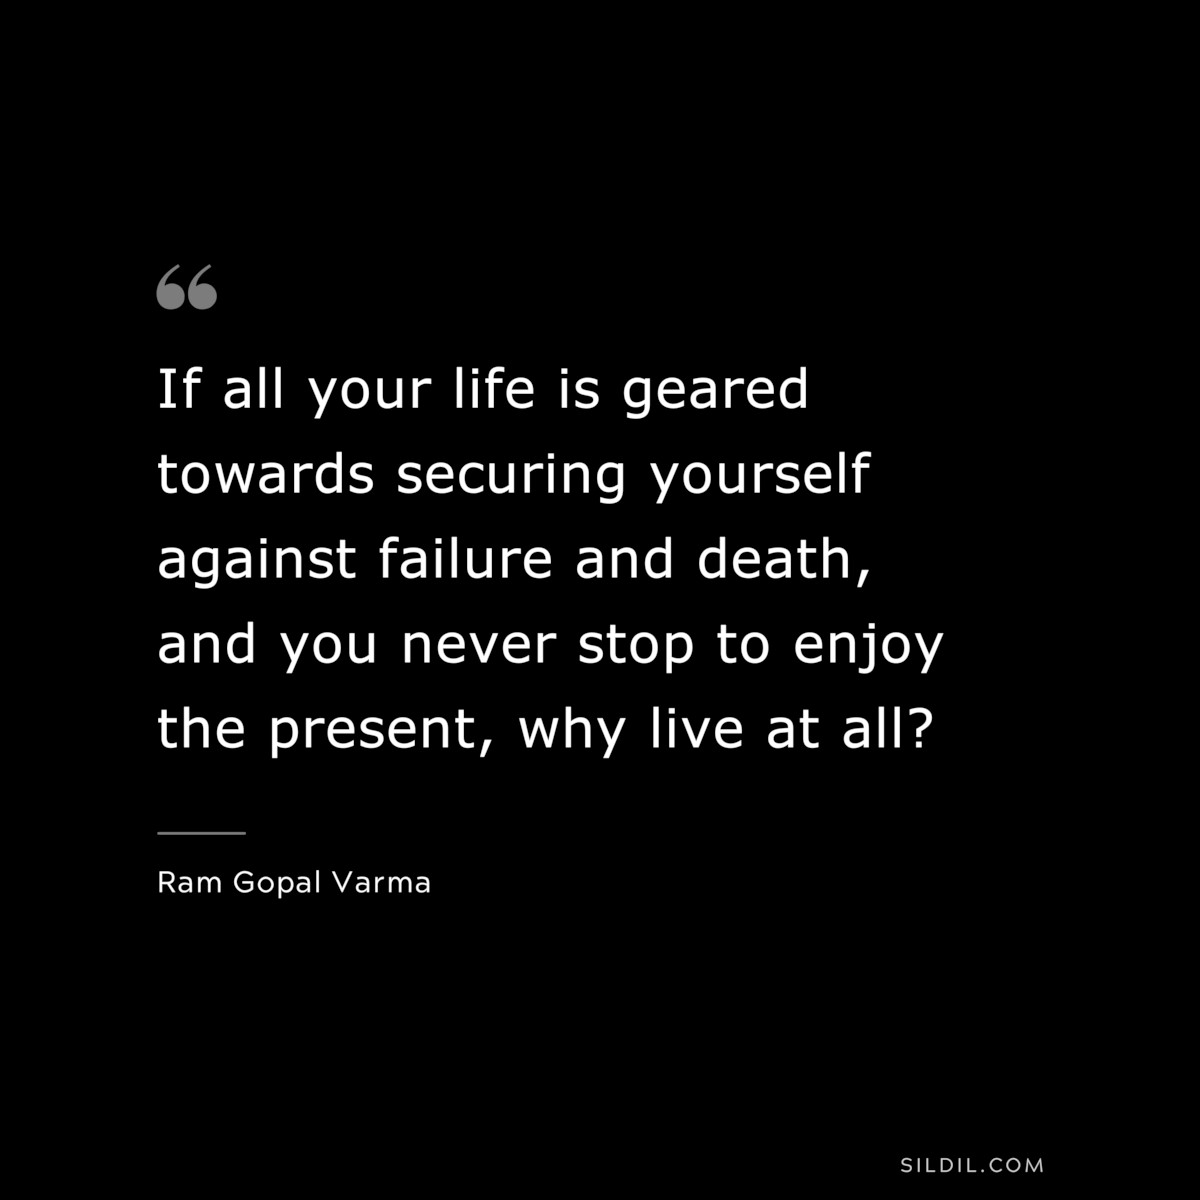 If all your life is geared towards securing yourself against failure and death, and you never stop to enjoy the present, why live at all? ― Ram Gopal Varma